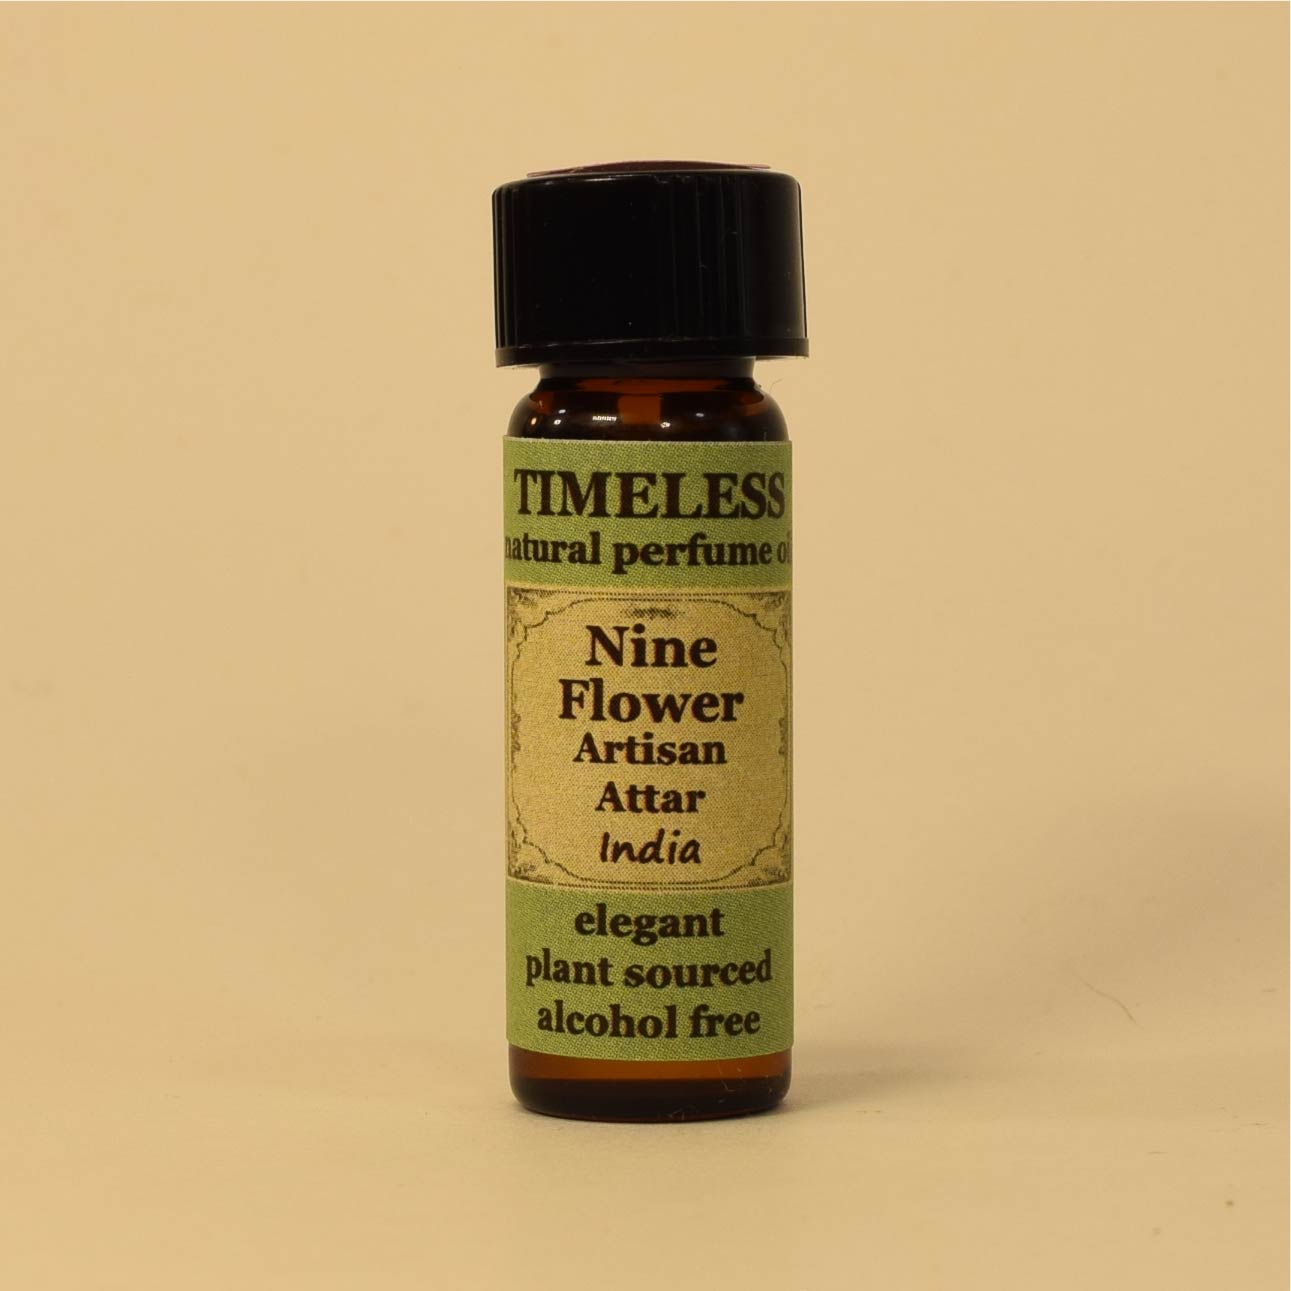 TIMELESS Nine Flower Attar is an exotic oriental floral blend with a sensual musky base note